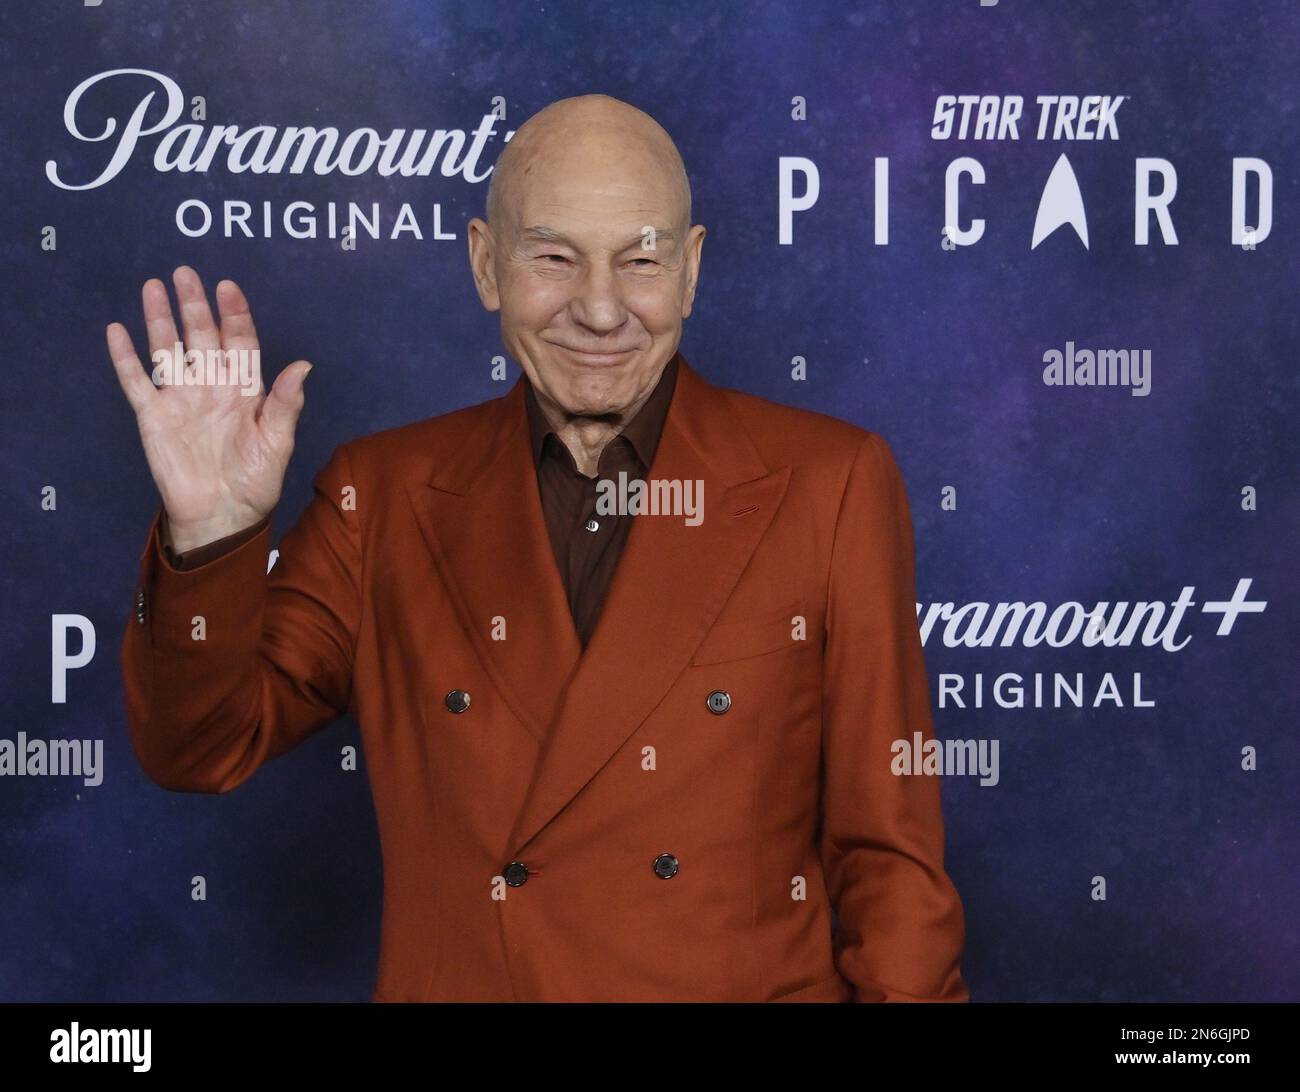 Los Angeles, United States. 09th Feb, 2023. Cast member Patrick Stewart attends the final season premiere of 'Star Trek: Picard' at the TCL Chinese Theatre in the Hollywood section of Los Angeles on Thursday, February 9, 2023. Photo by Jim Ruymen/UPI Credit: UPI/Alamy Live News Stock Photo